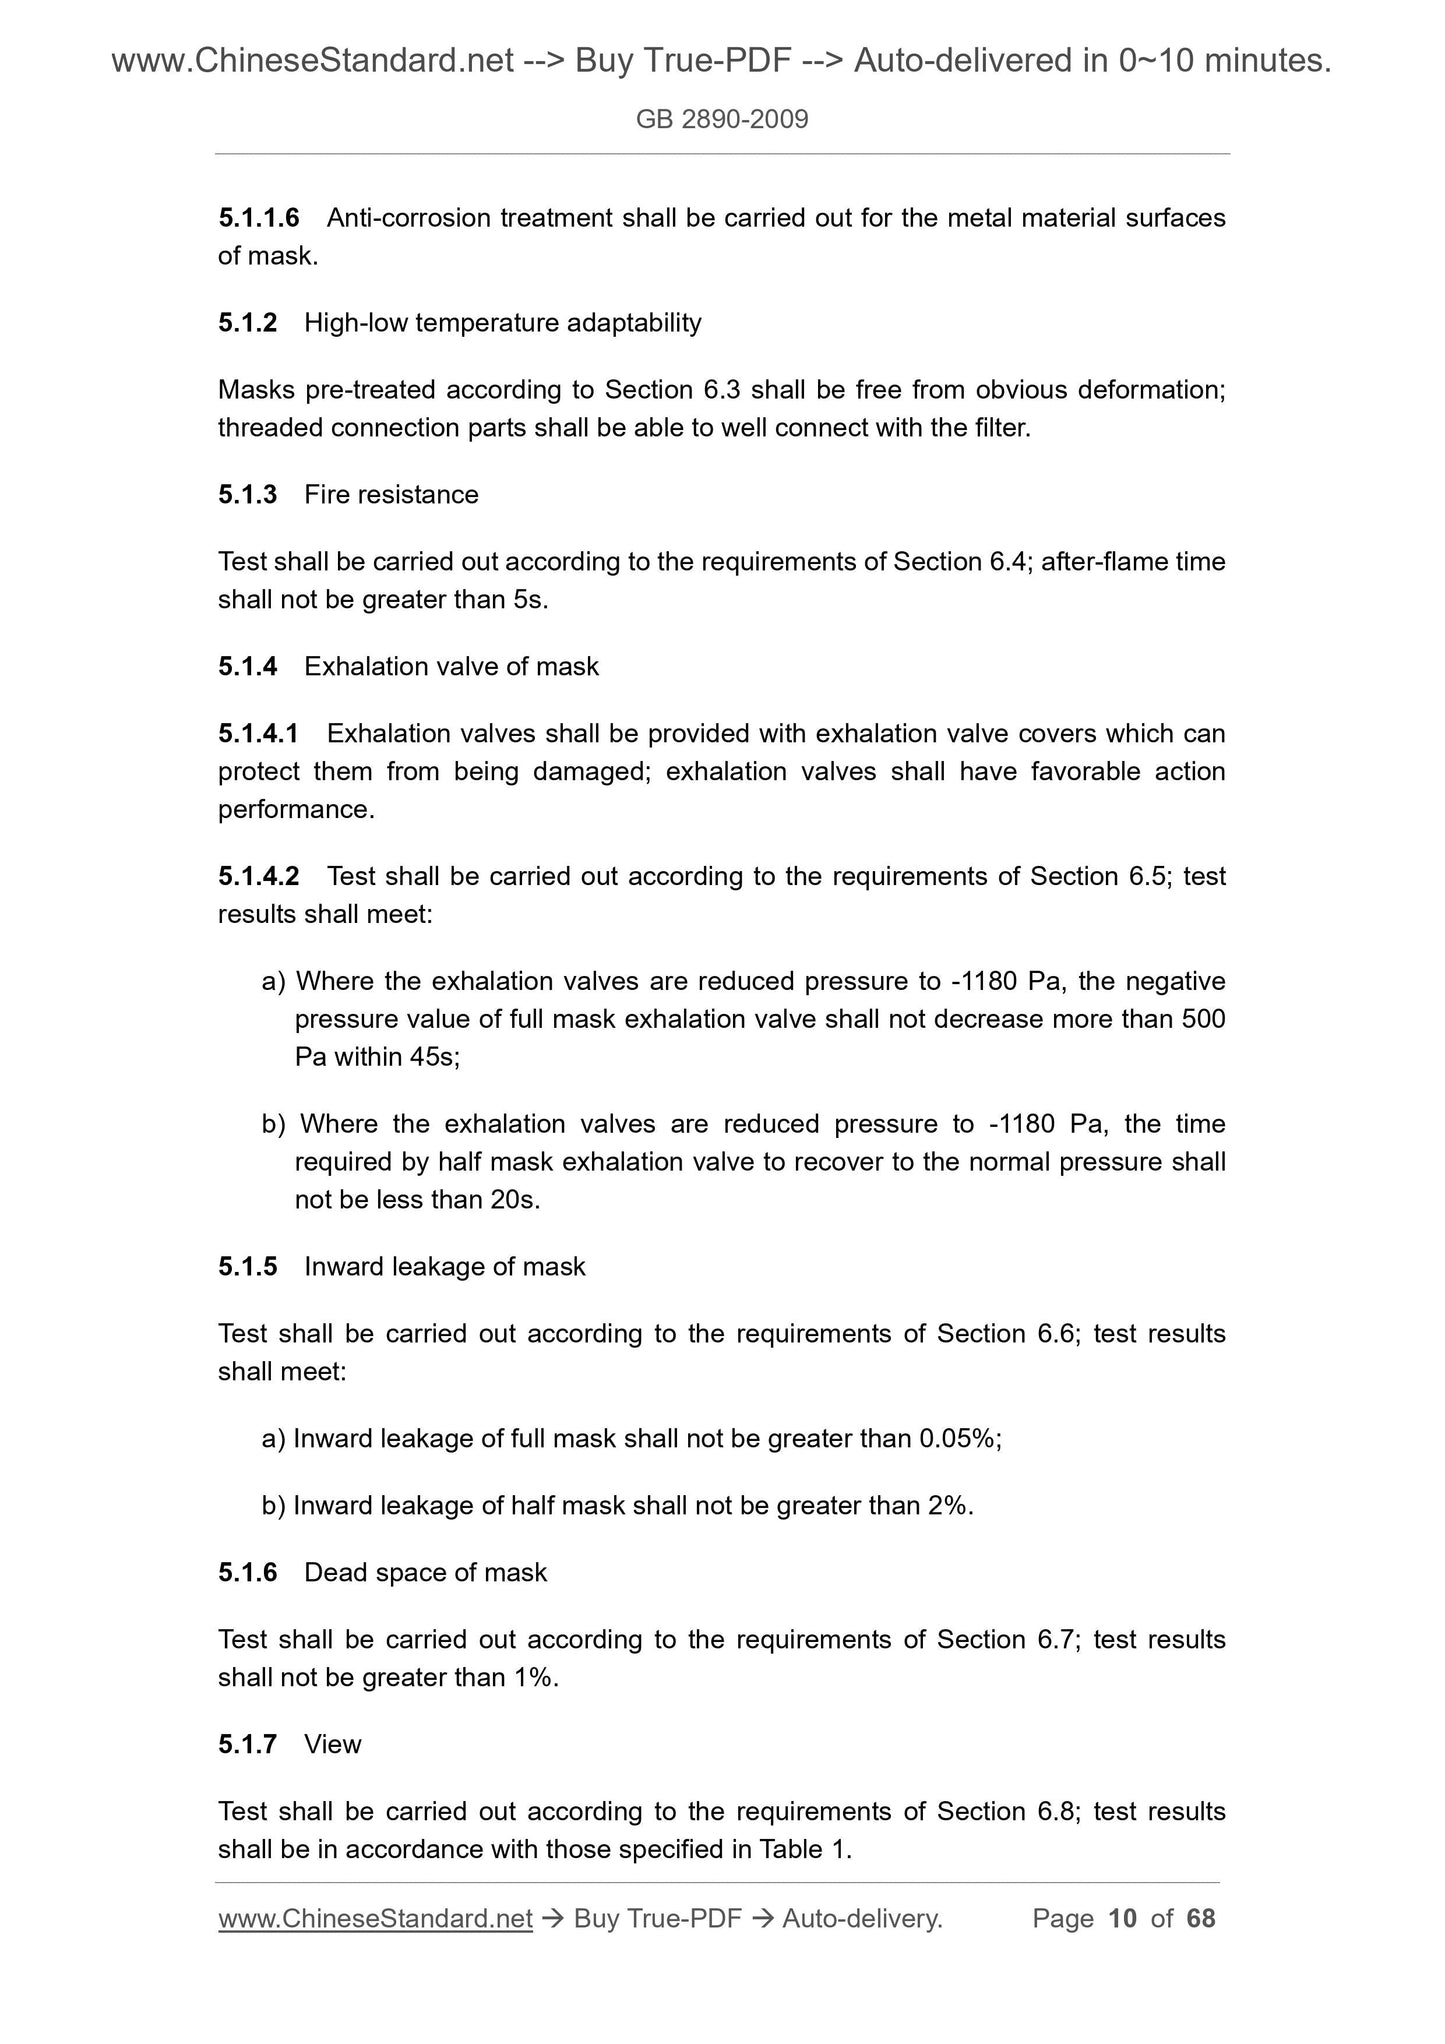 GB 2890-2009 Page 5